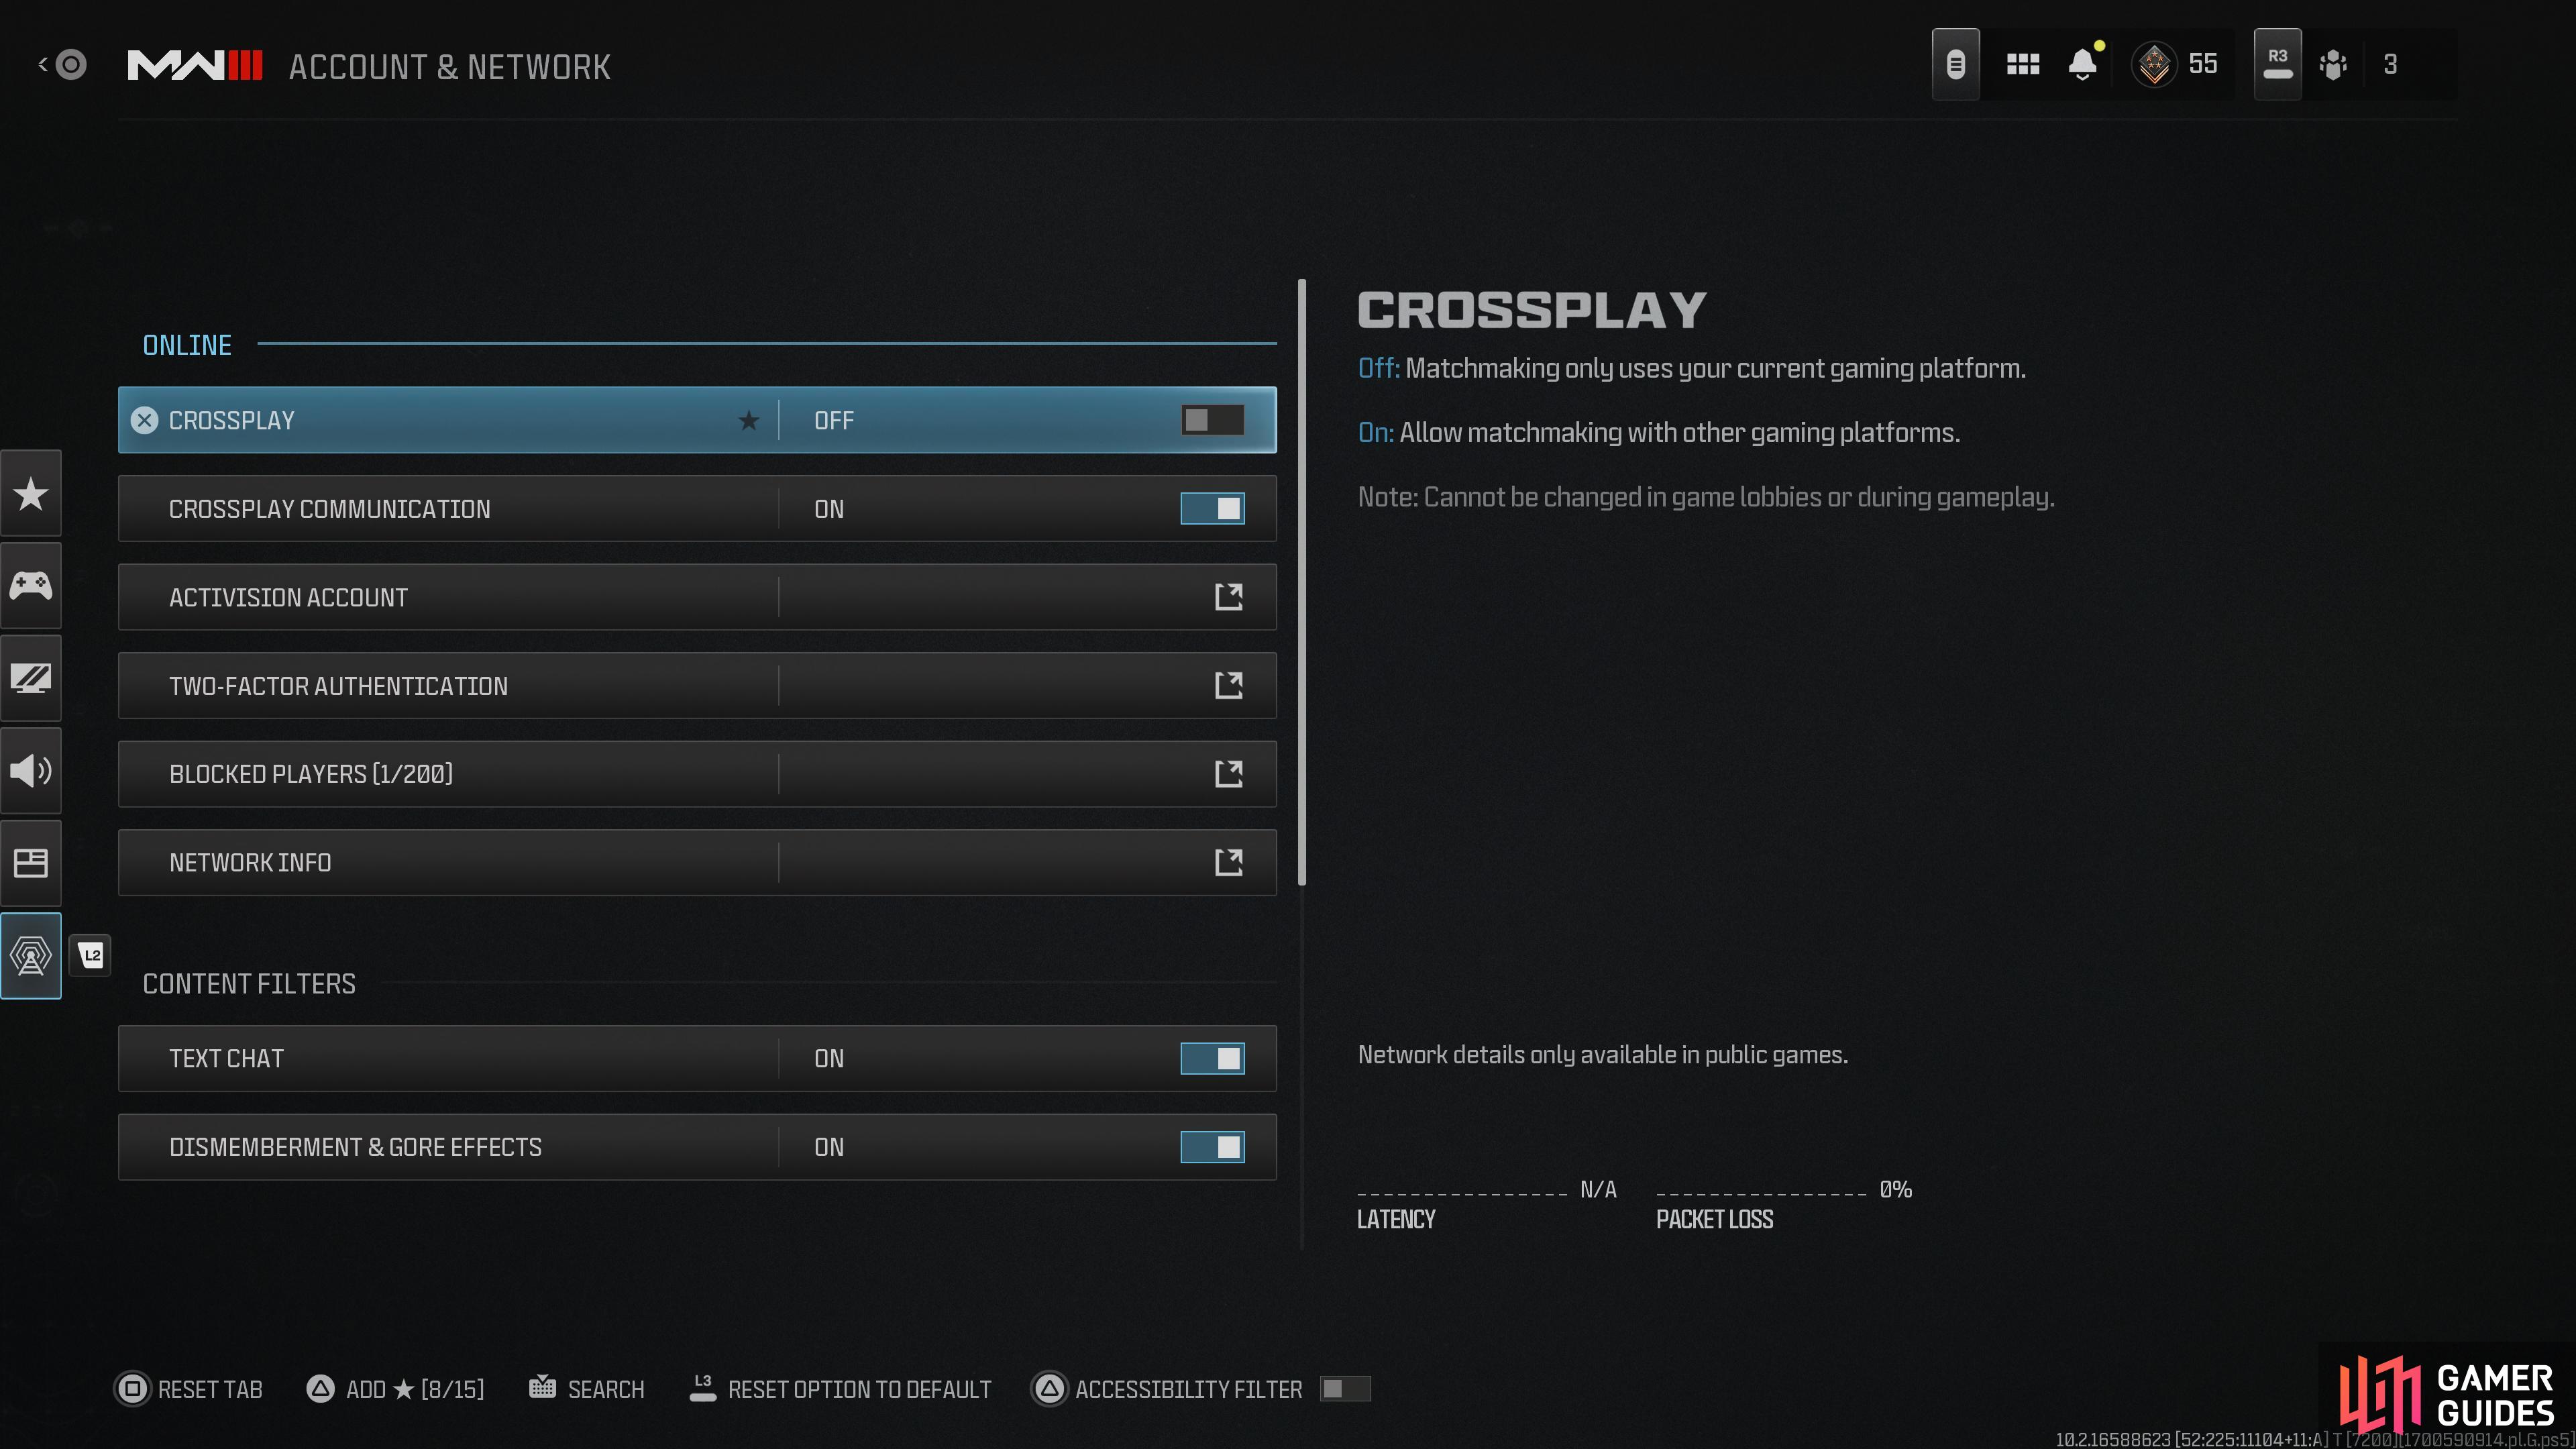 You can turn of Crossplay by heading over to the Account & Network Tab.